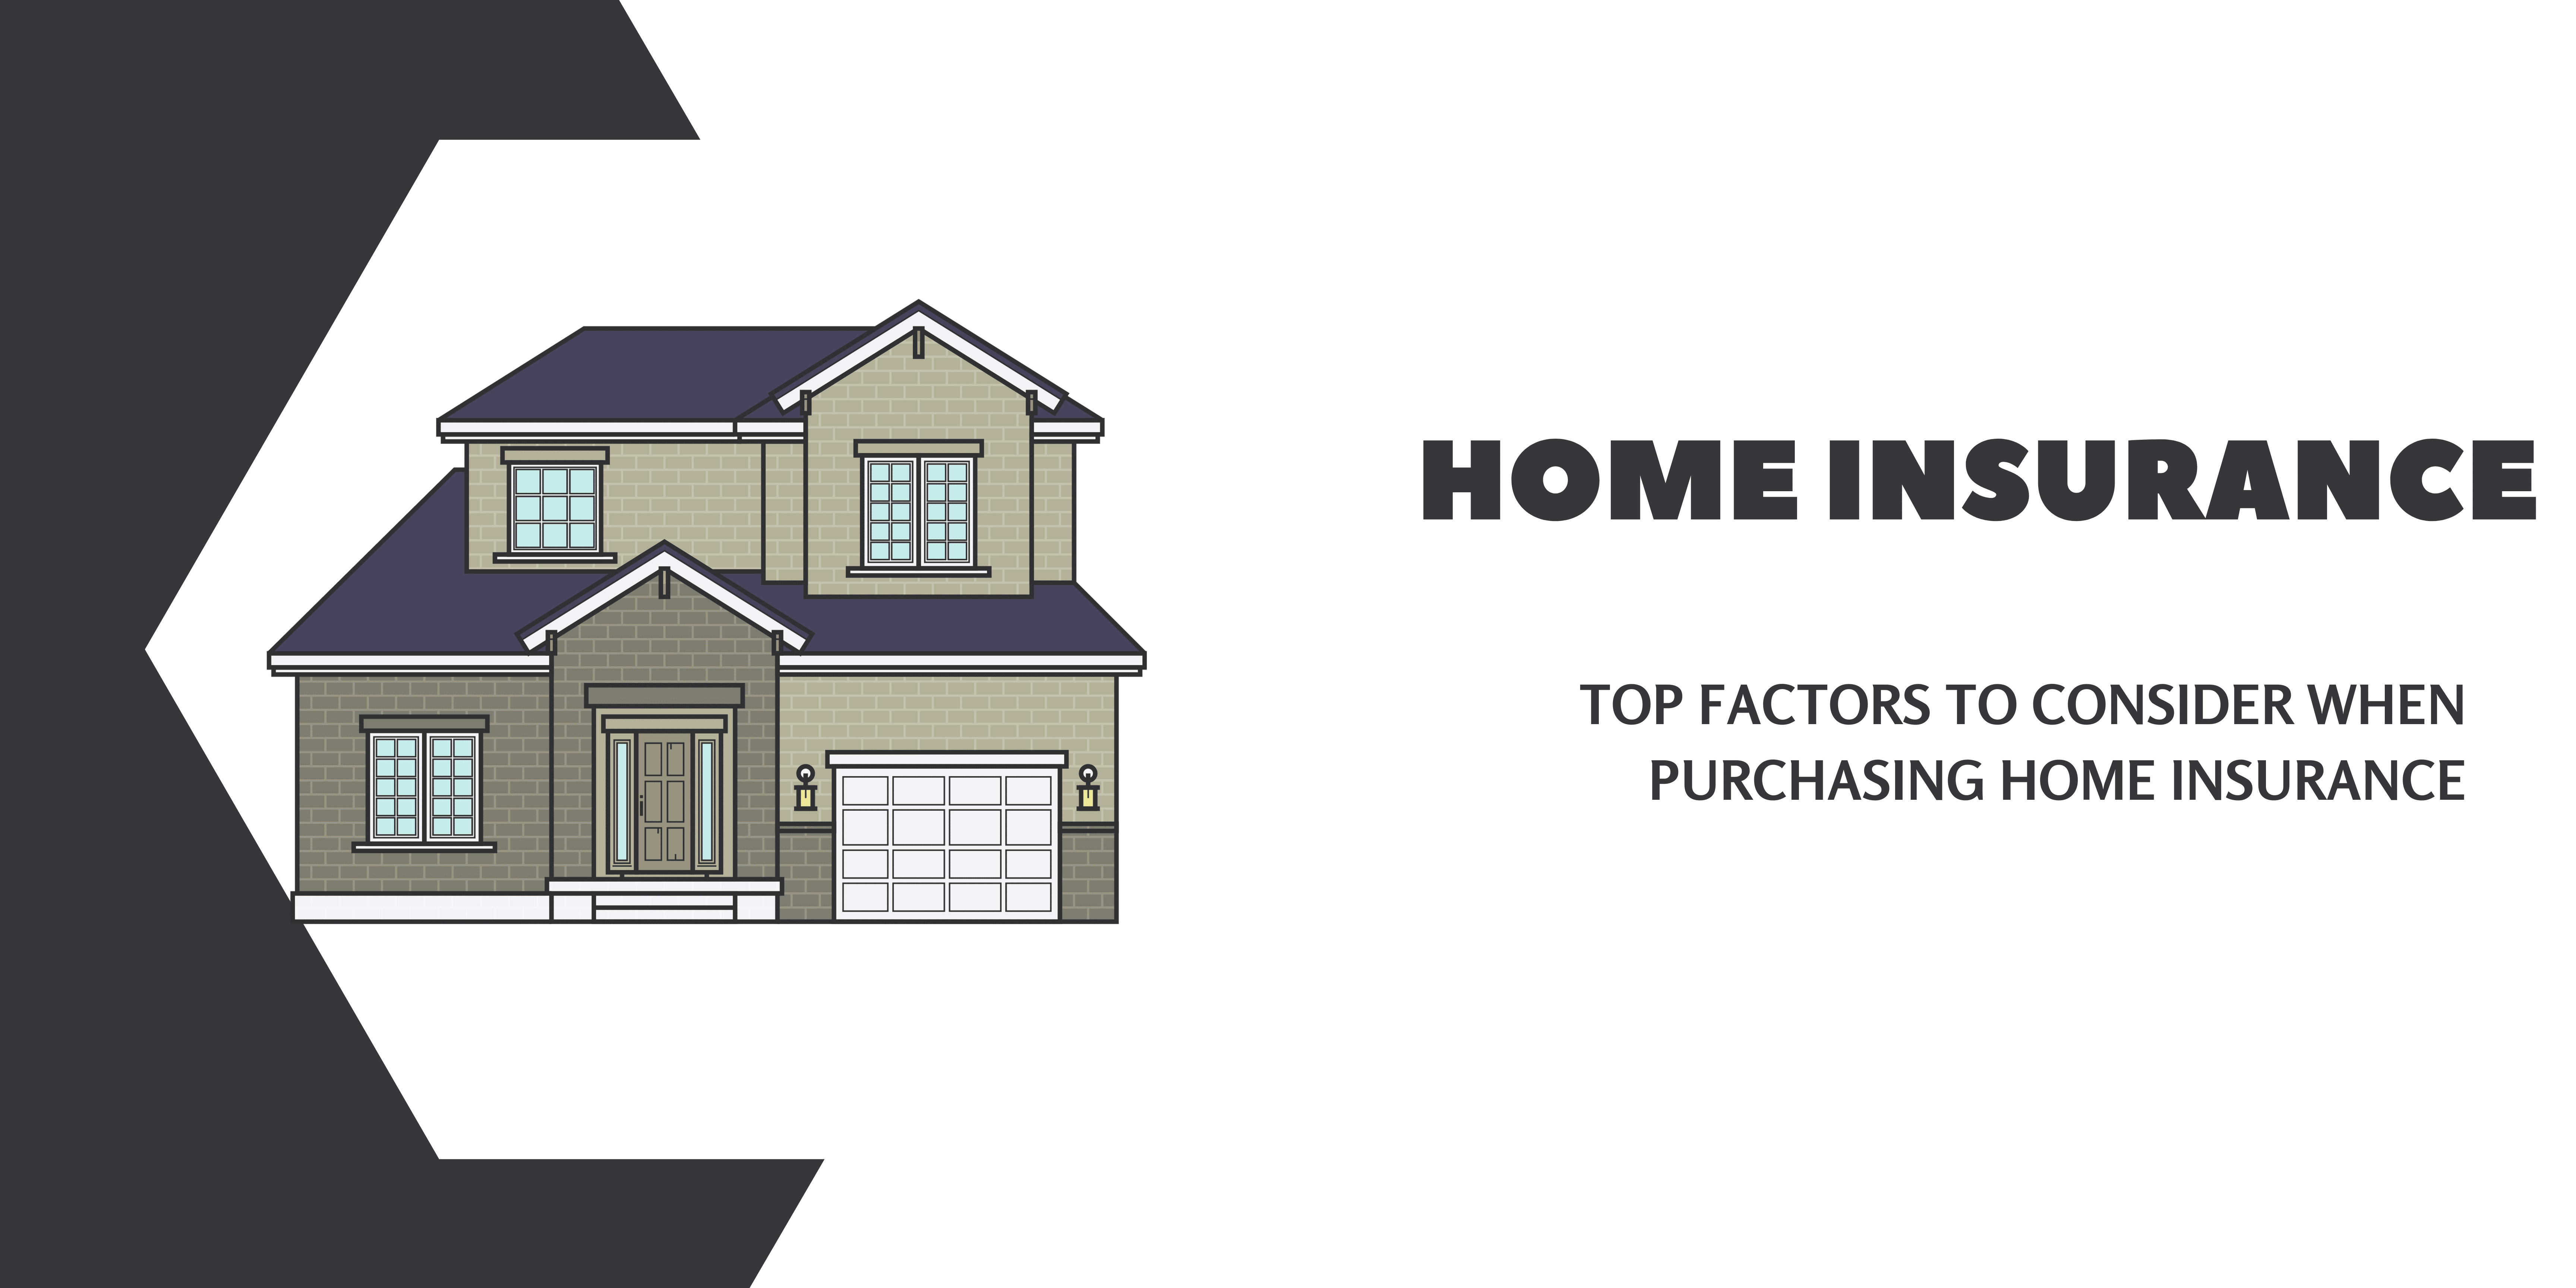 Top Factors To Consider When Purchasing Home Insurance